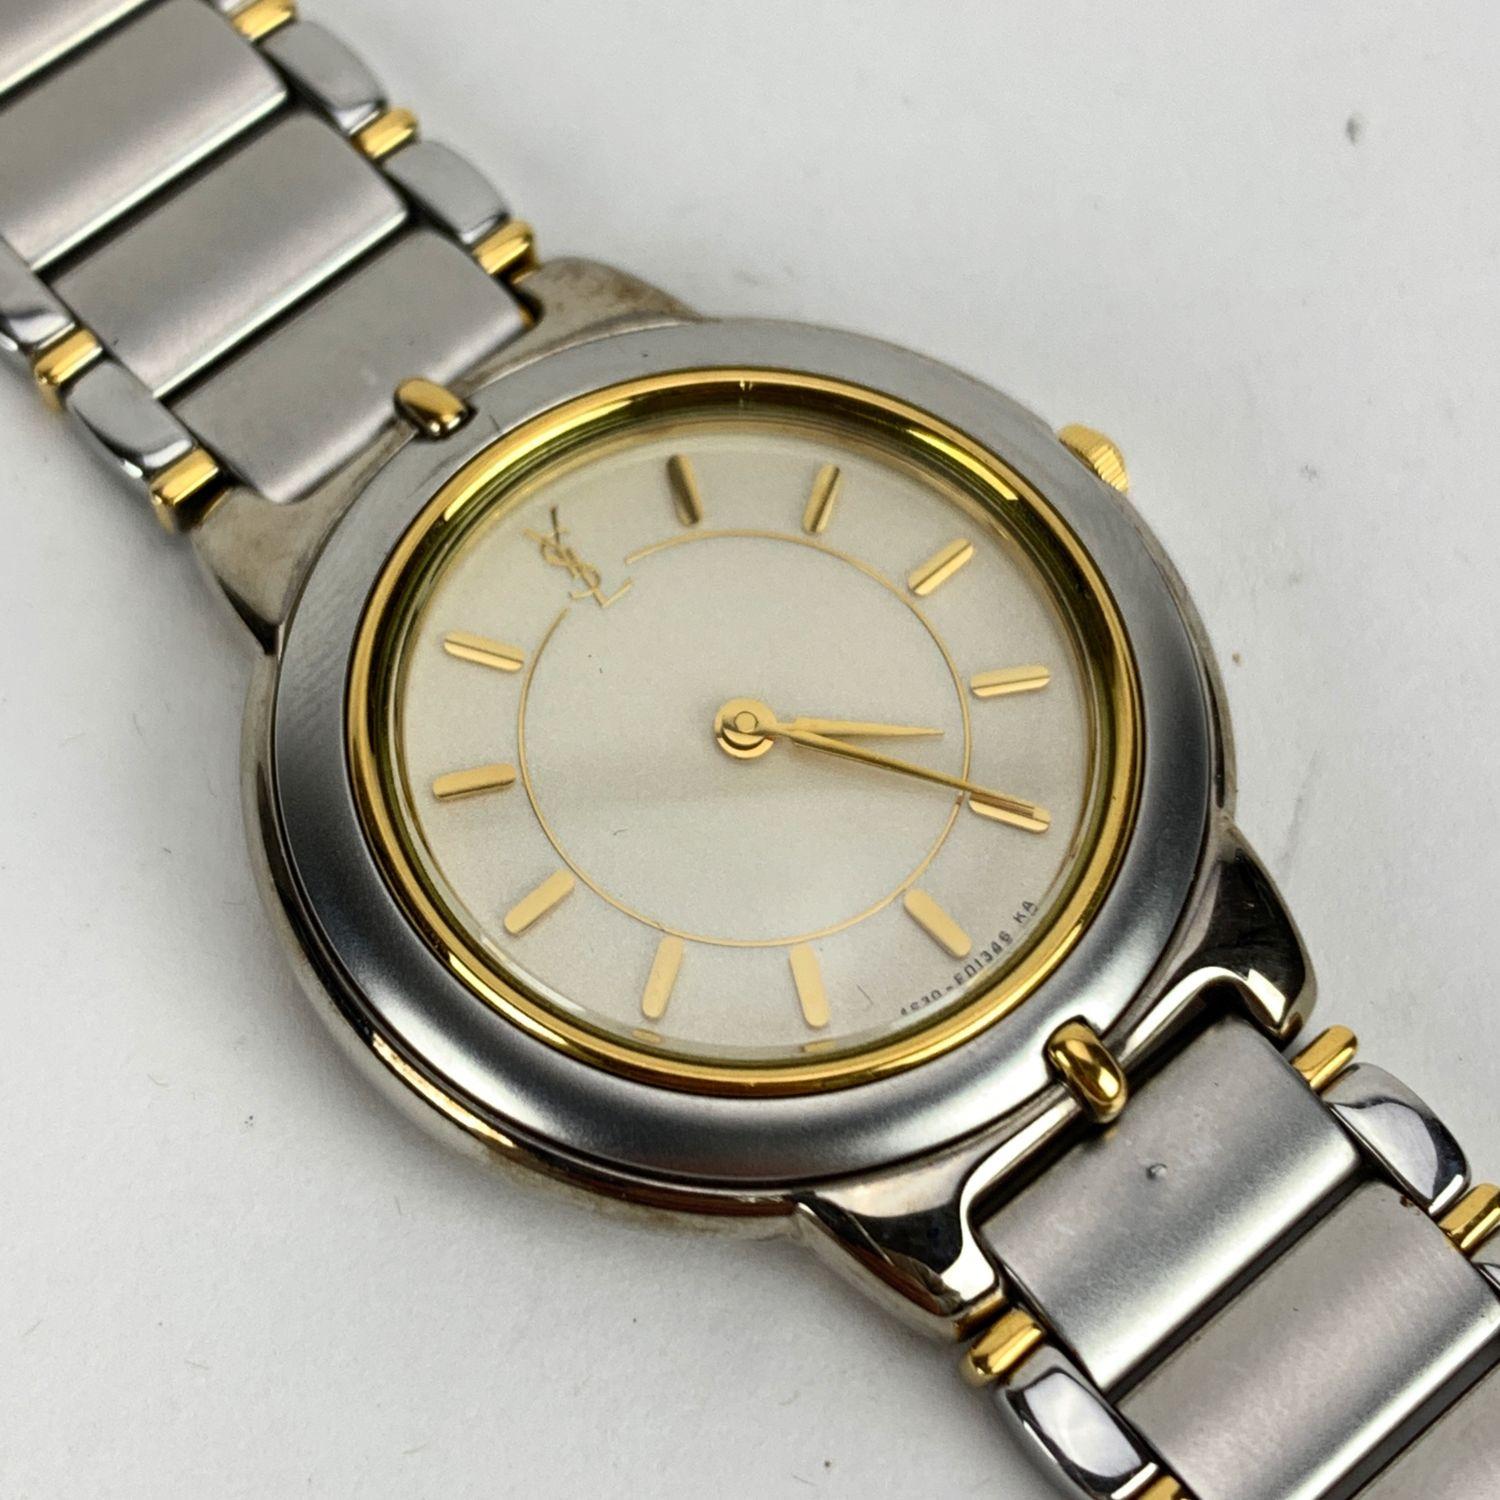 Vintage Yves Saint Laurent wrist watch. Model 4620-E62267 TA . Gold and silver metal. Base metal round case (30 mm). White dial. Total length: 7.5 inches - 19.05 cm

Condition

A - EXCELLENT

The watch is in working condition. Yves Saint Laurent box